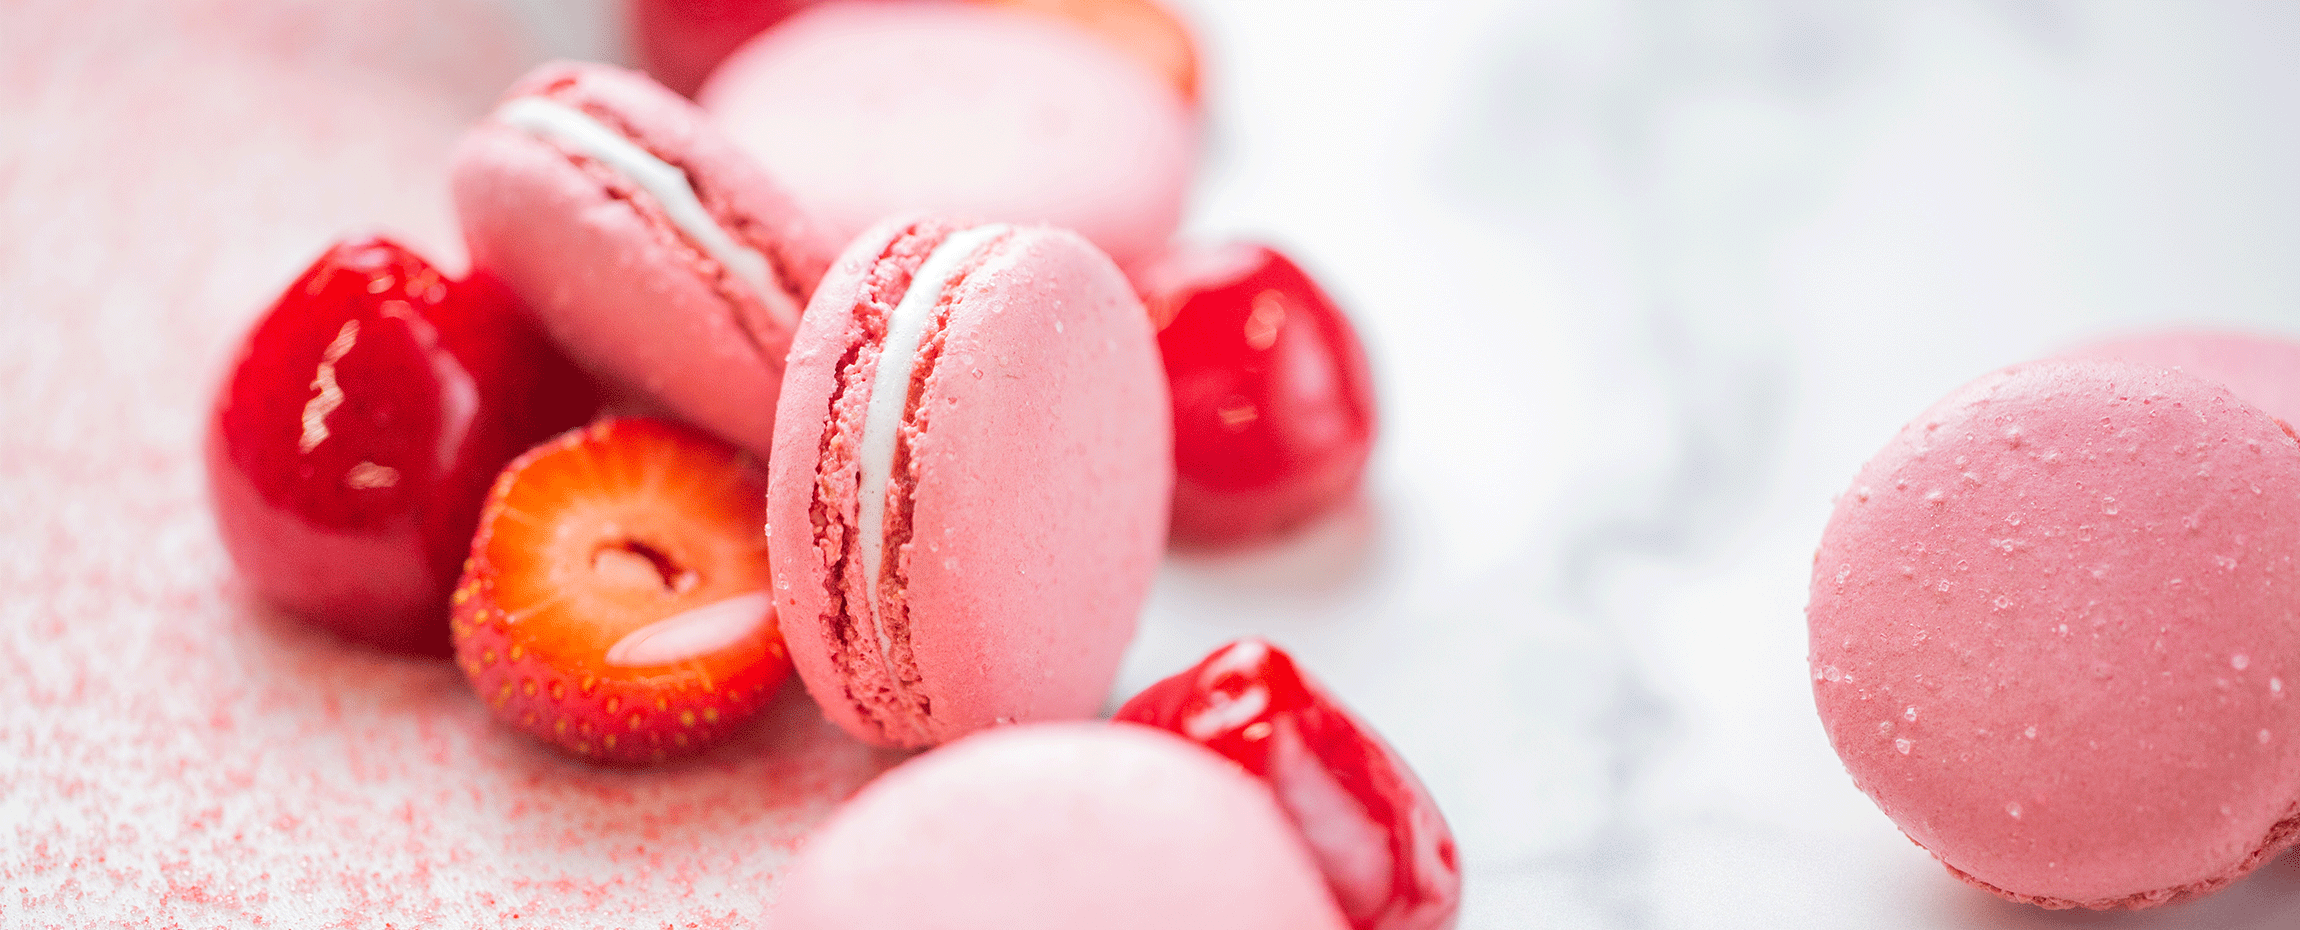 The Strawberry Candy macaron